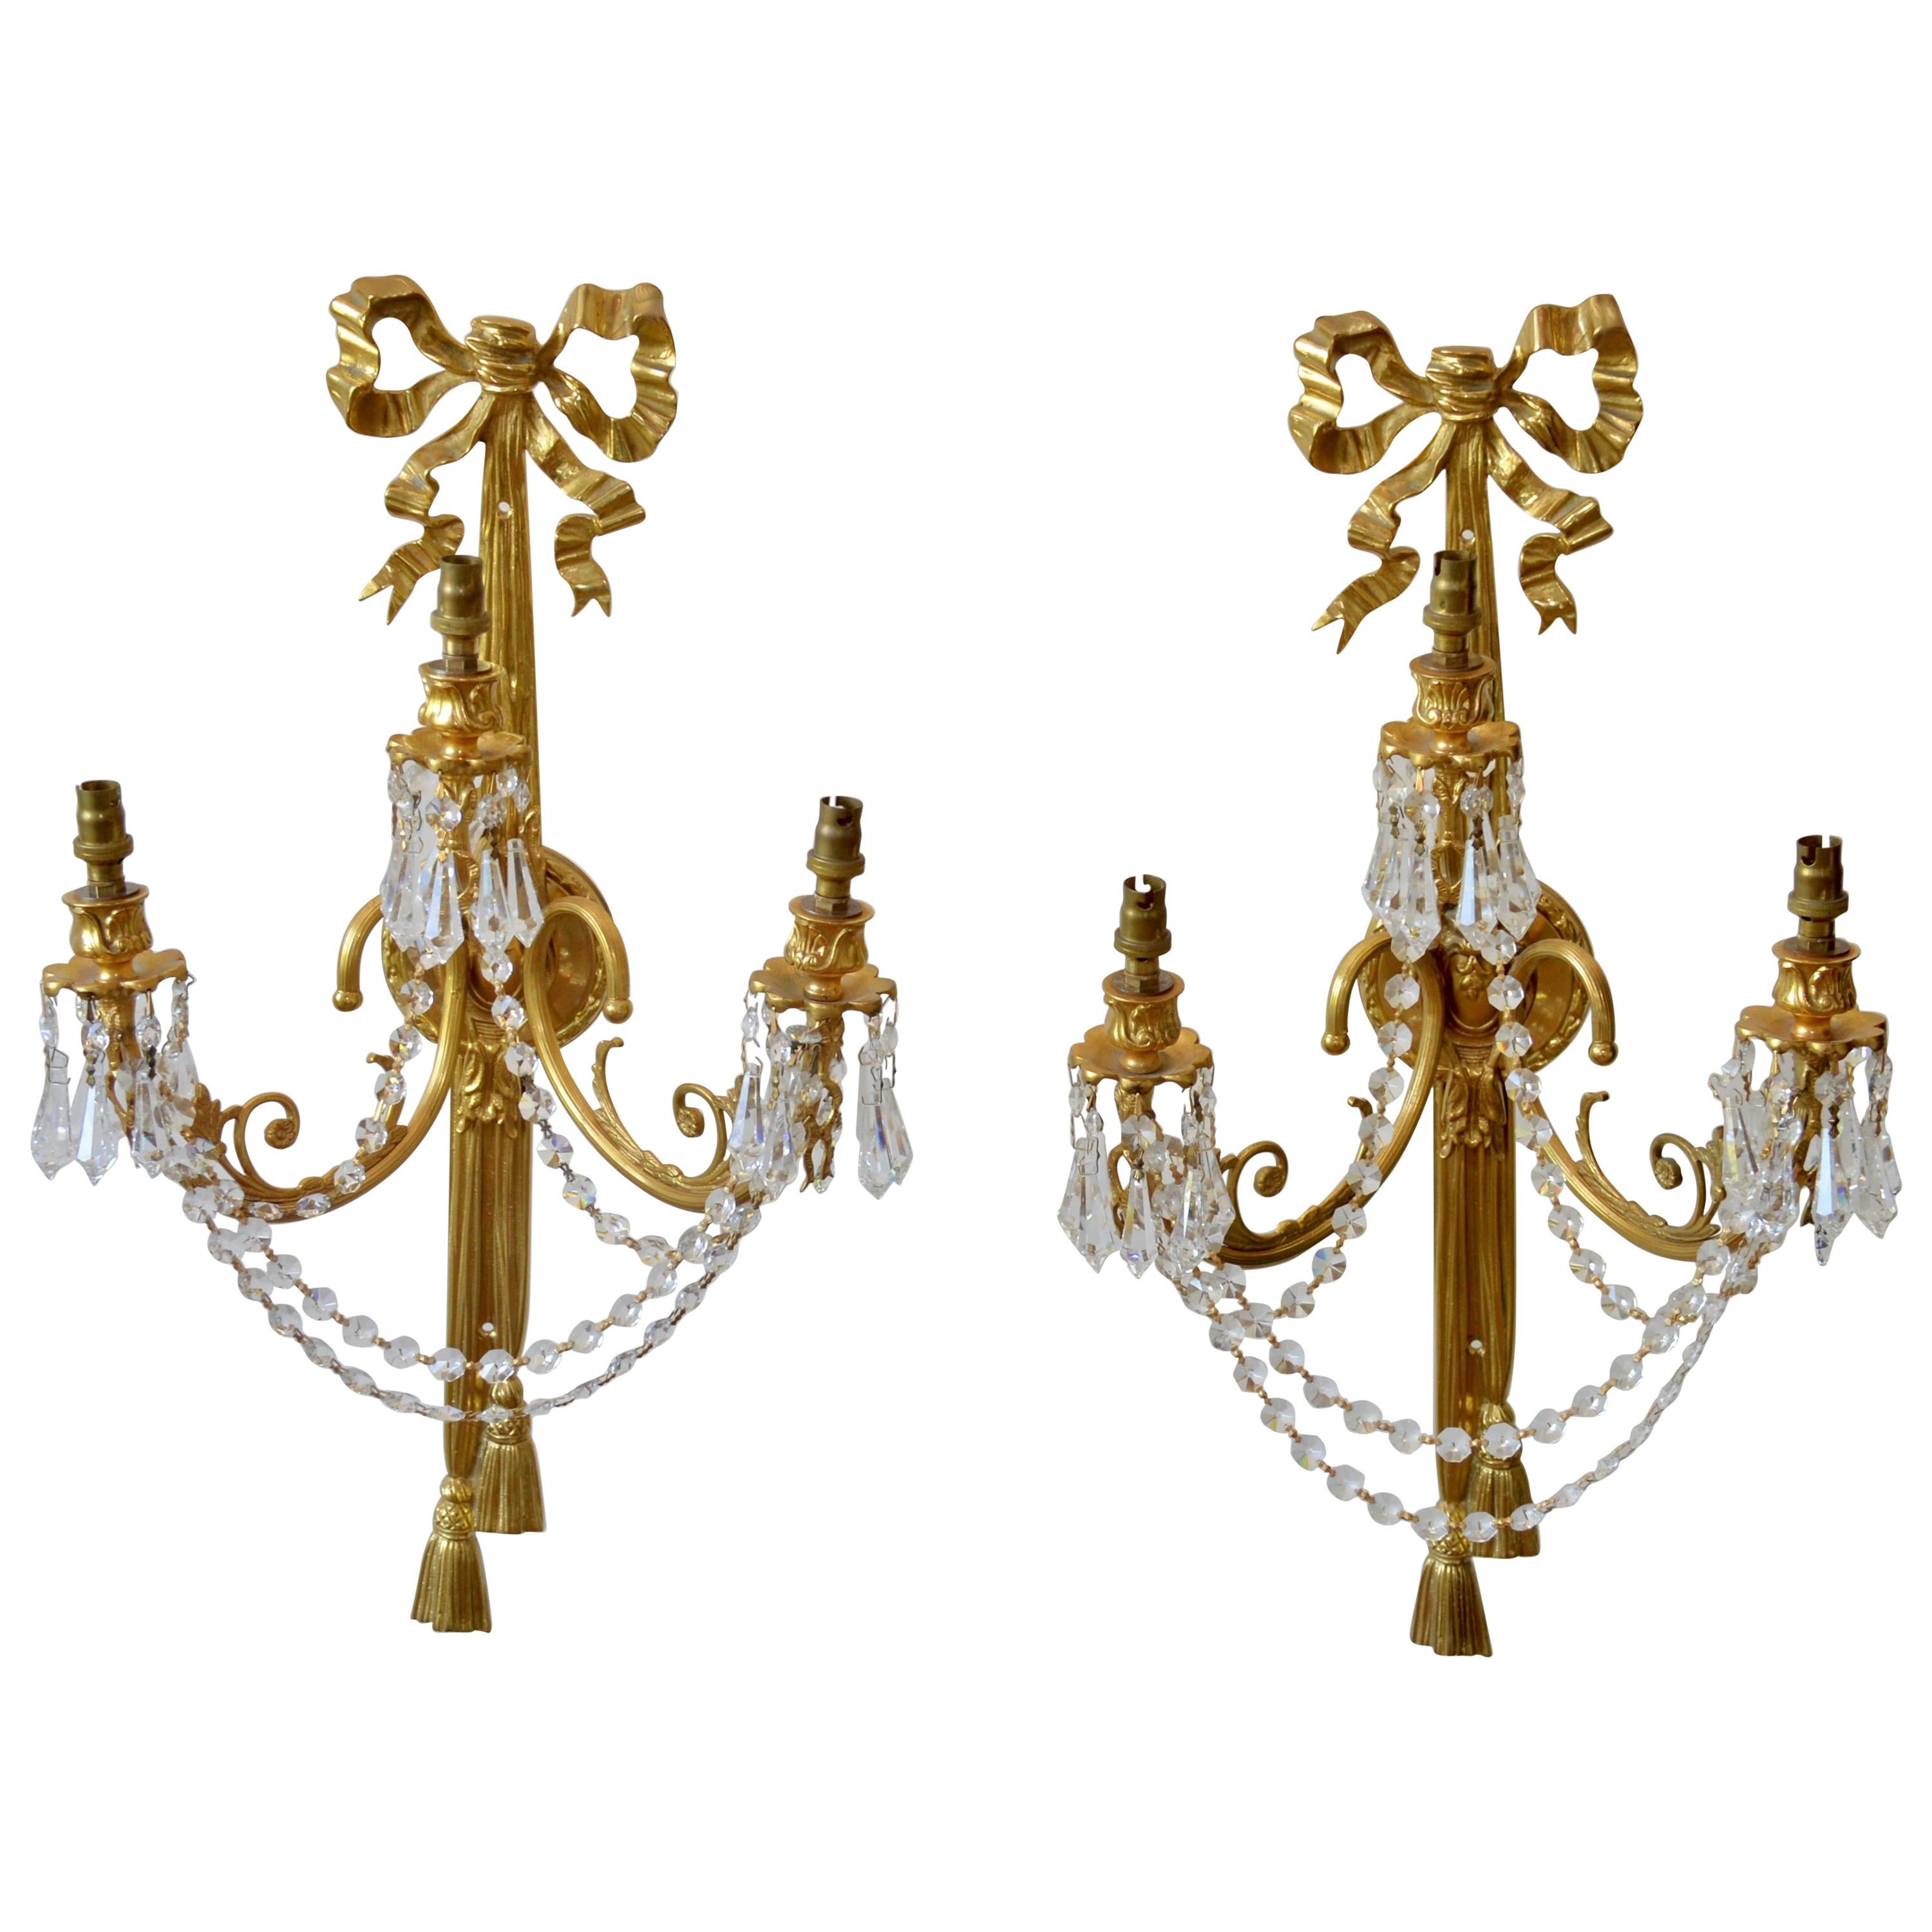 Large Vintage French Rococo Style Wall Sconces